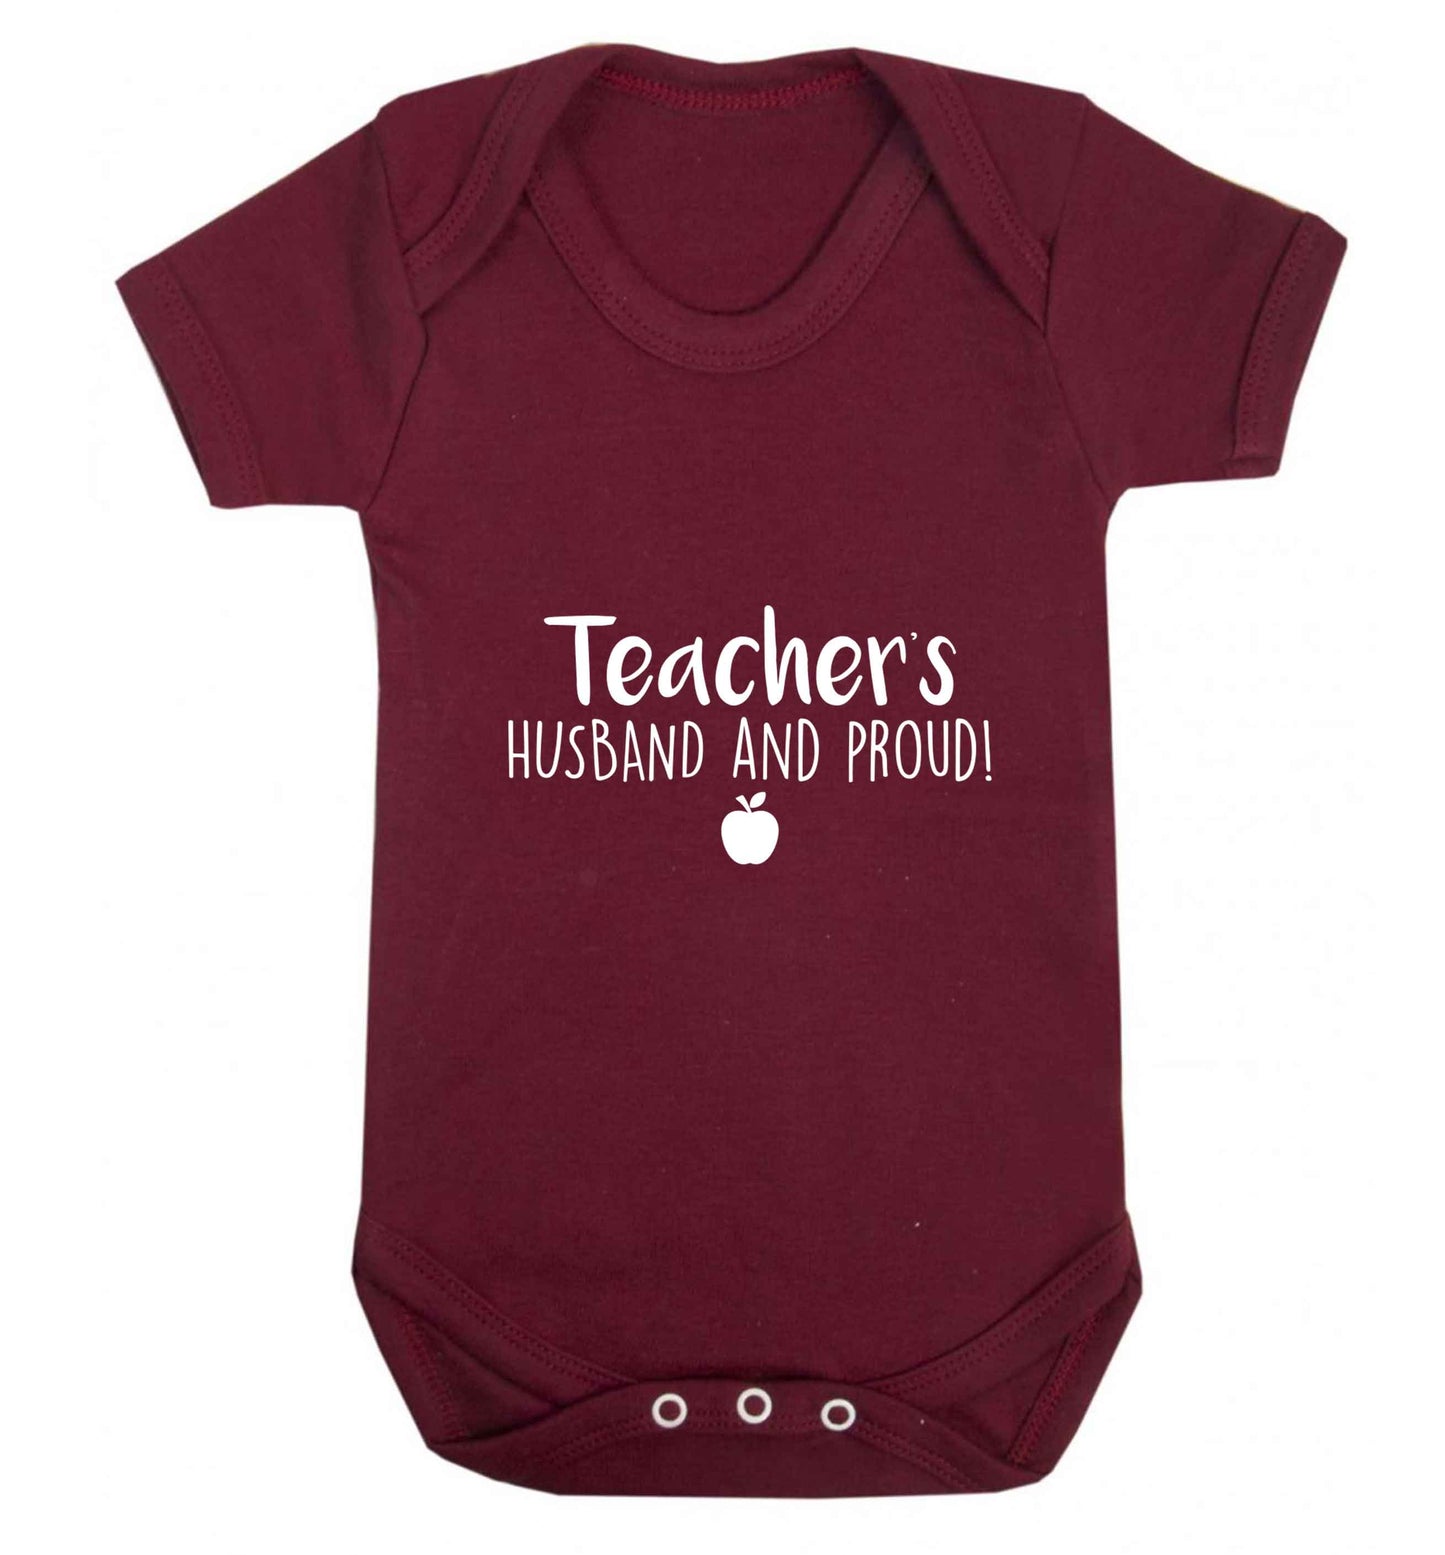 Teachers husband and proud baby vest maroon 18-24 months